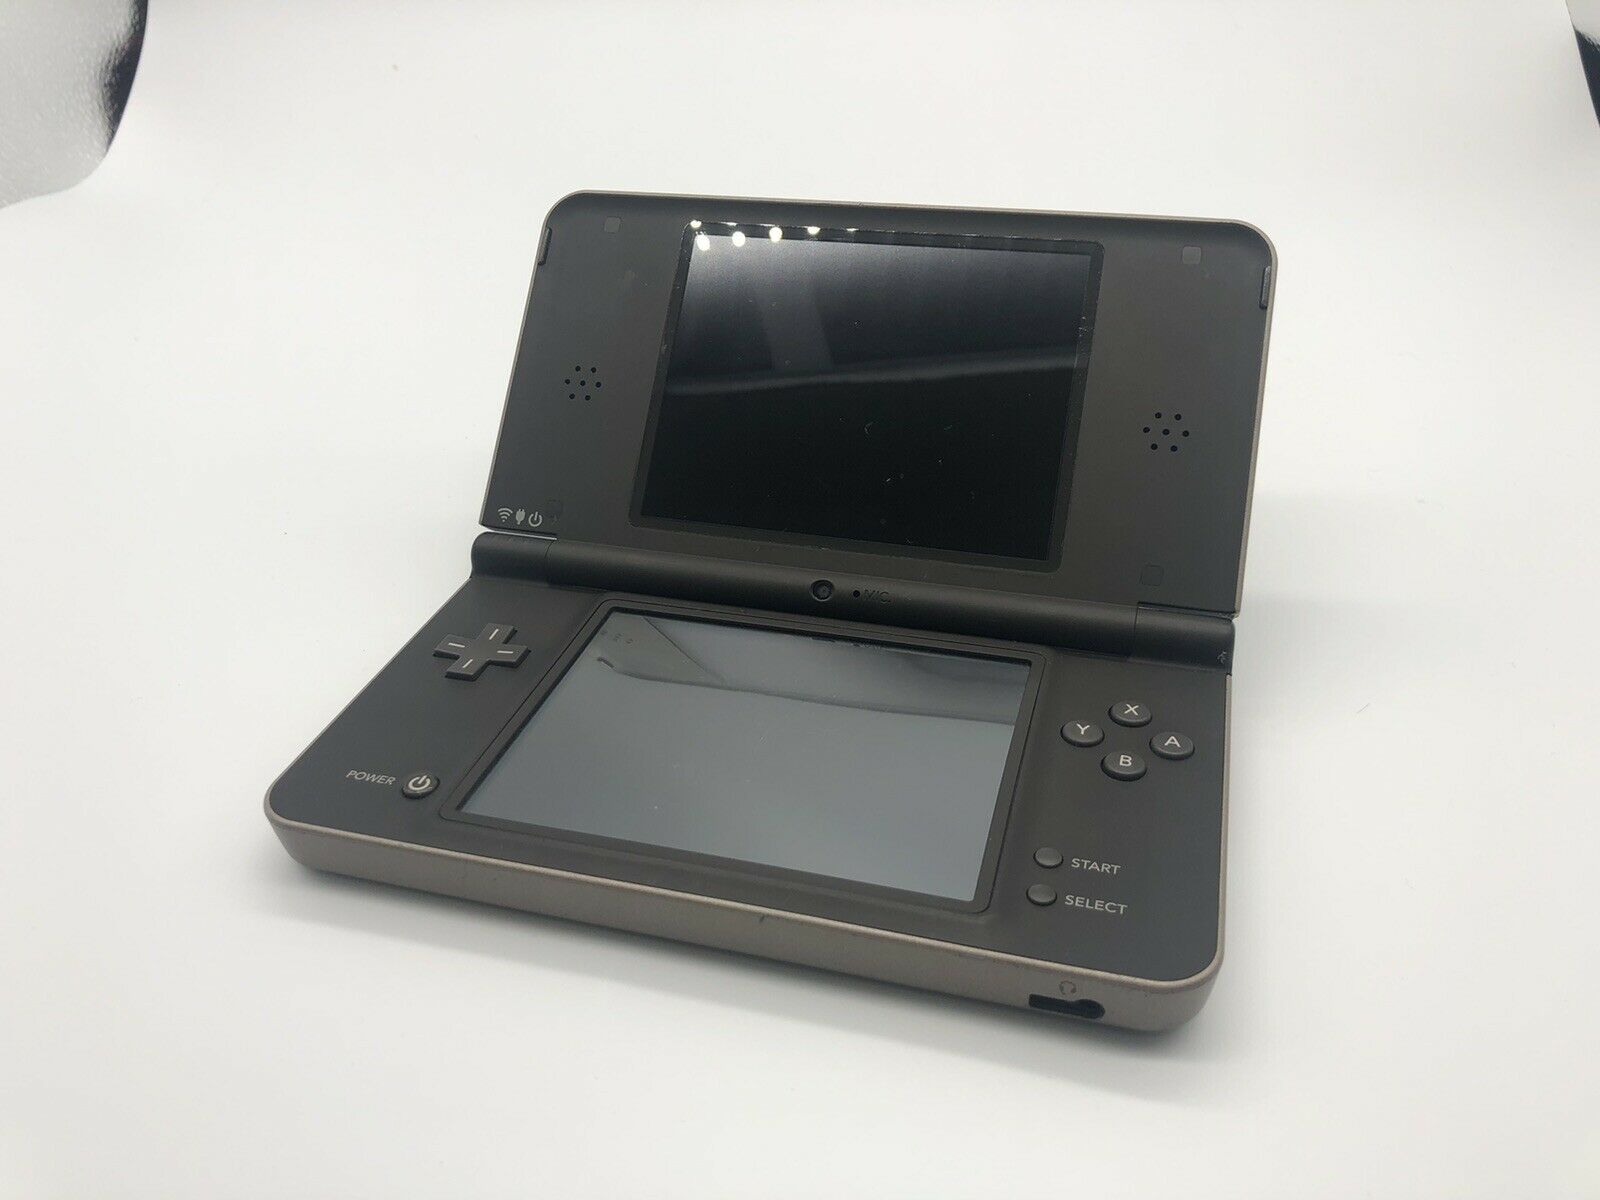 Gloomy/Gray Nintendo DSi XL with charger and pen *TESTED* - iCommerce ...